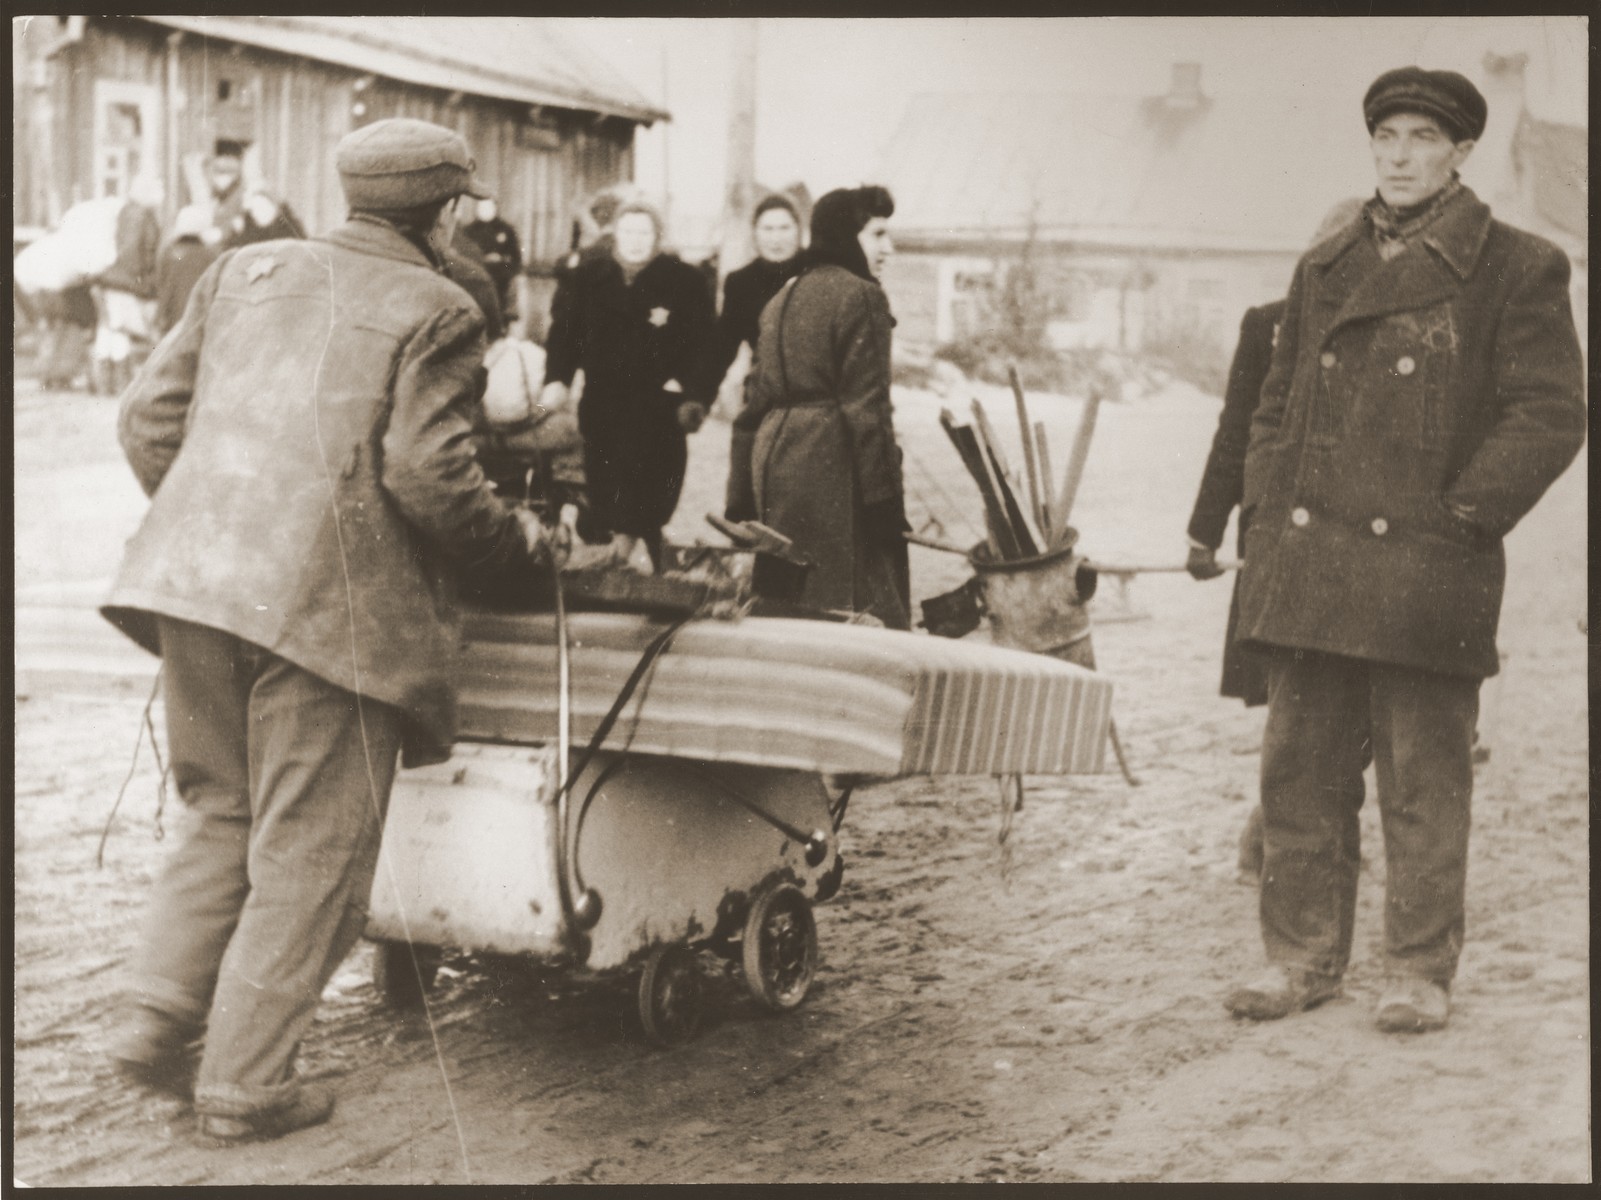 Residents of the ghetto move to new housing after the Germans reduced the borders of the Kovno ghetto.  Since there were no vehicles, these residents are using a baby carriage to transport their belongings.